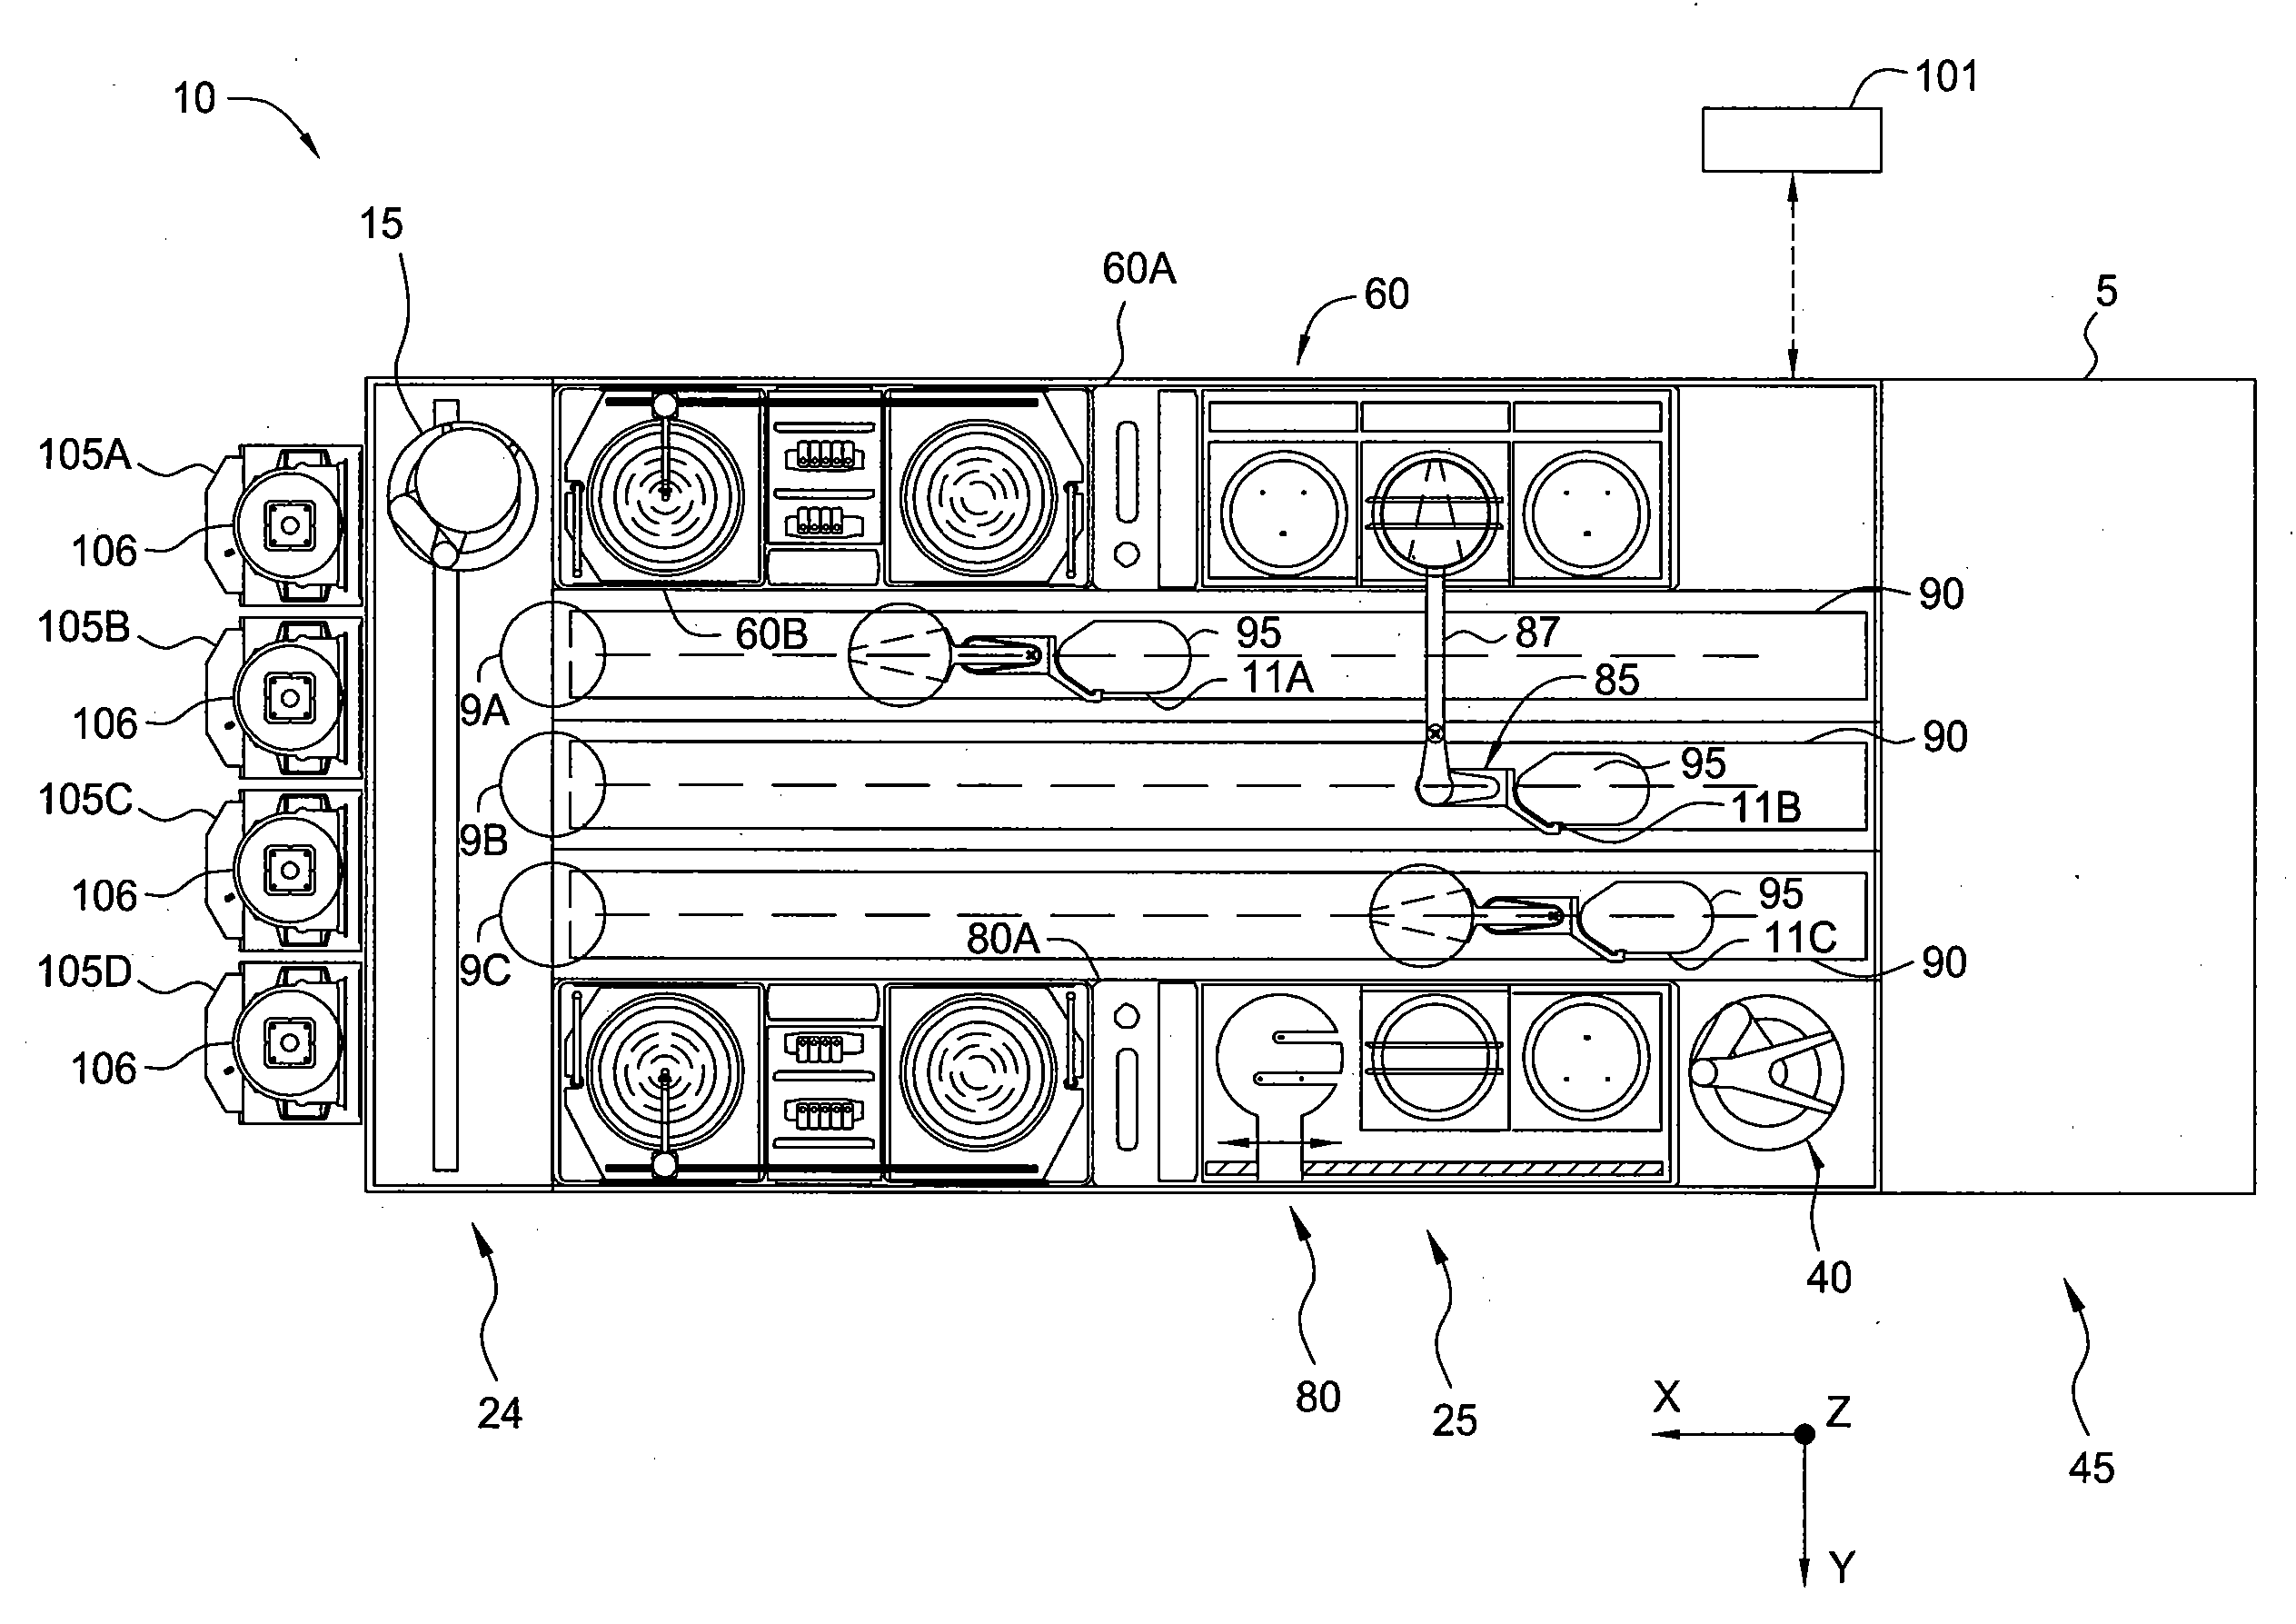 Scheduling method for processing equipment